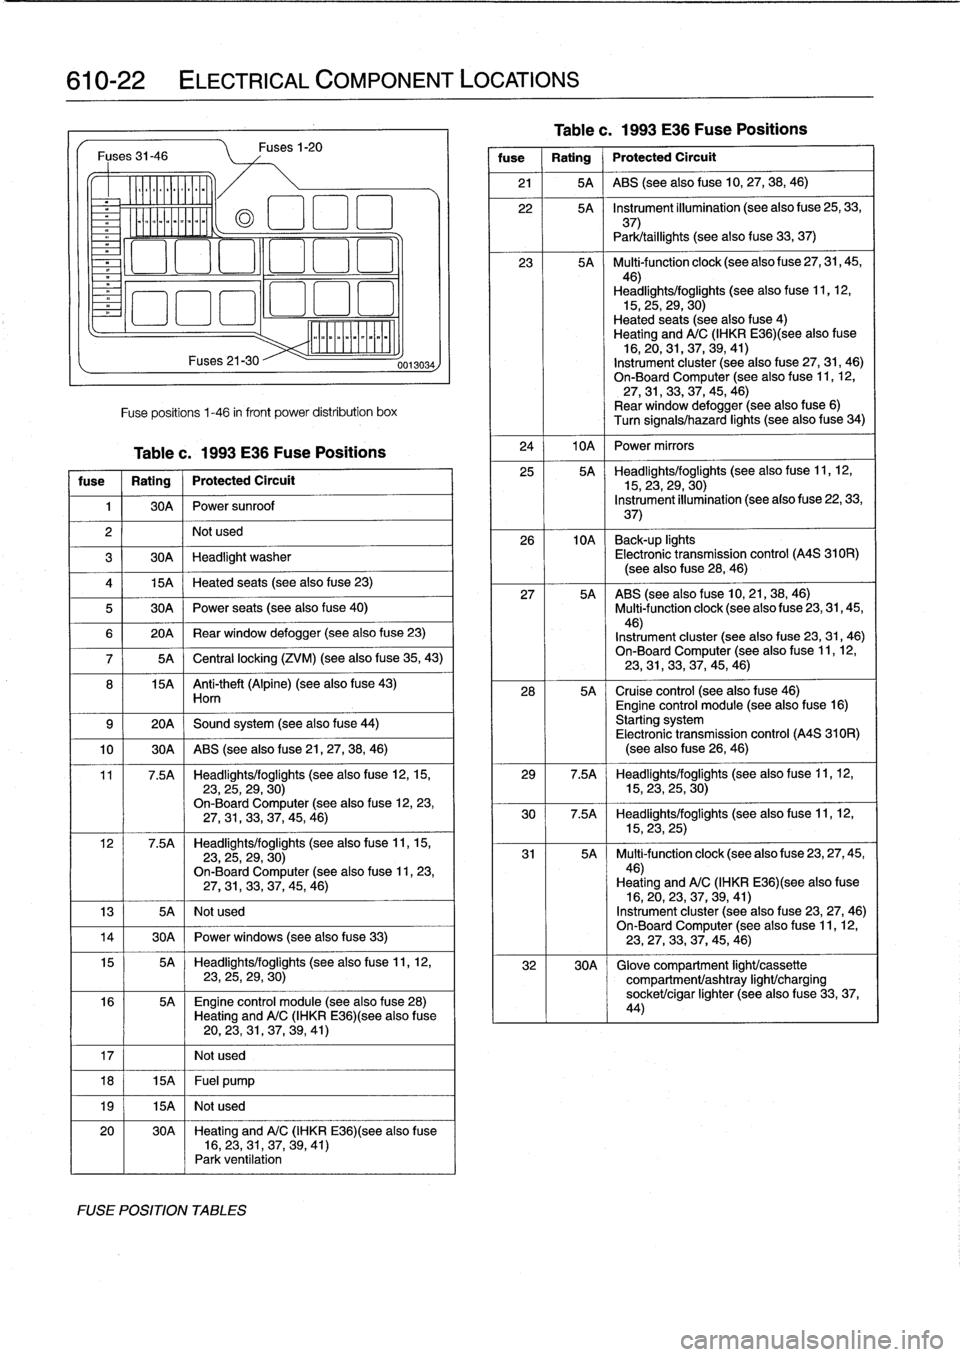 BMW M3 1992 E36 Workshop Manual 
610-22

	

ELECTRICAL
COMPONENT
LOCATIONS

Fuses
31-46

Ylililll

milililil
Fuses
21-30
Fuse
positions
1-46
in
front
Power
distribution
box

Table
c
.
1993
E36
Fuse
Positions

fuse

	

1
Rating

	

j